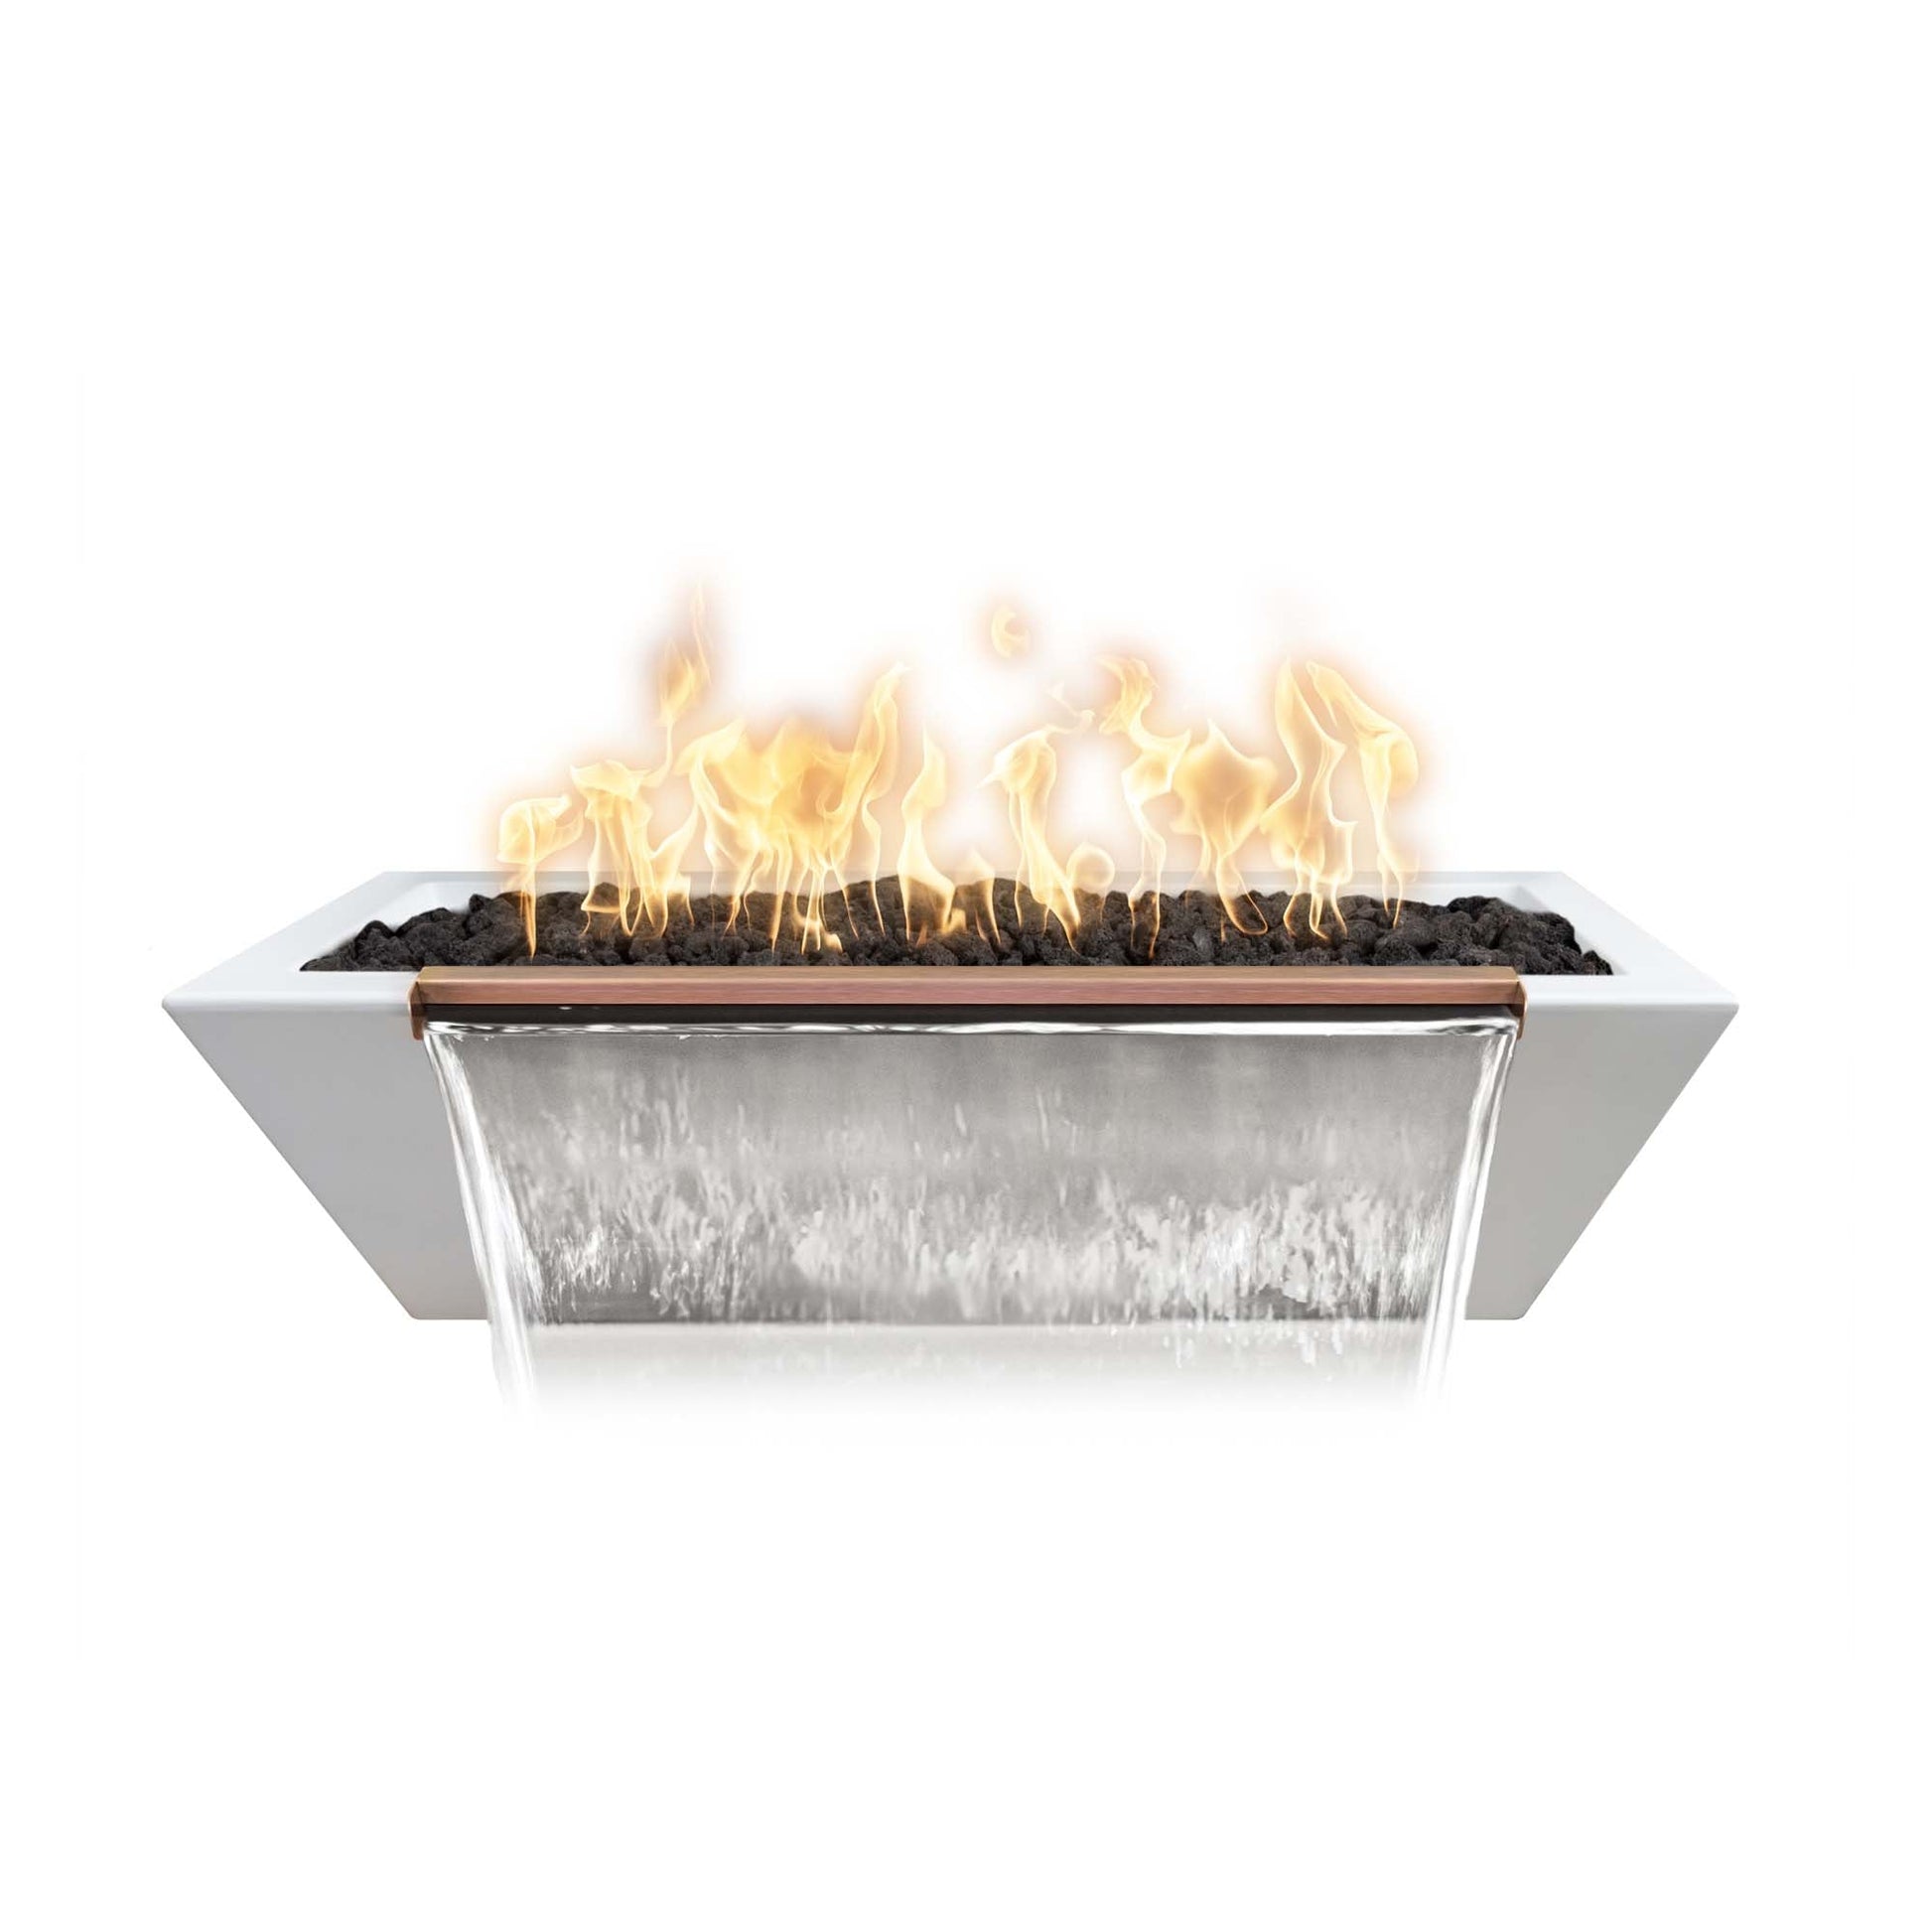 The Outdoor Plus Linear Maya 60" Brown GFRC Concrete Liquid Propane Fire & Water Bowl with Match Lit Ignition